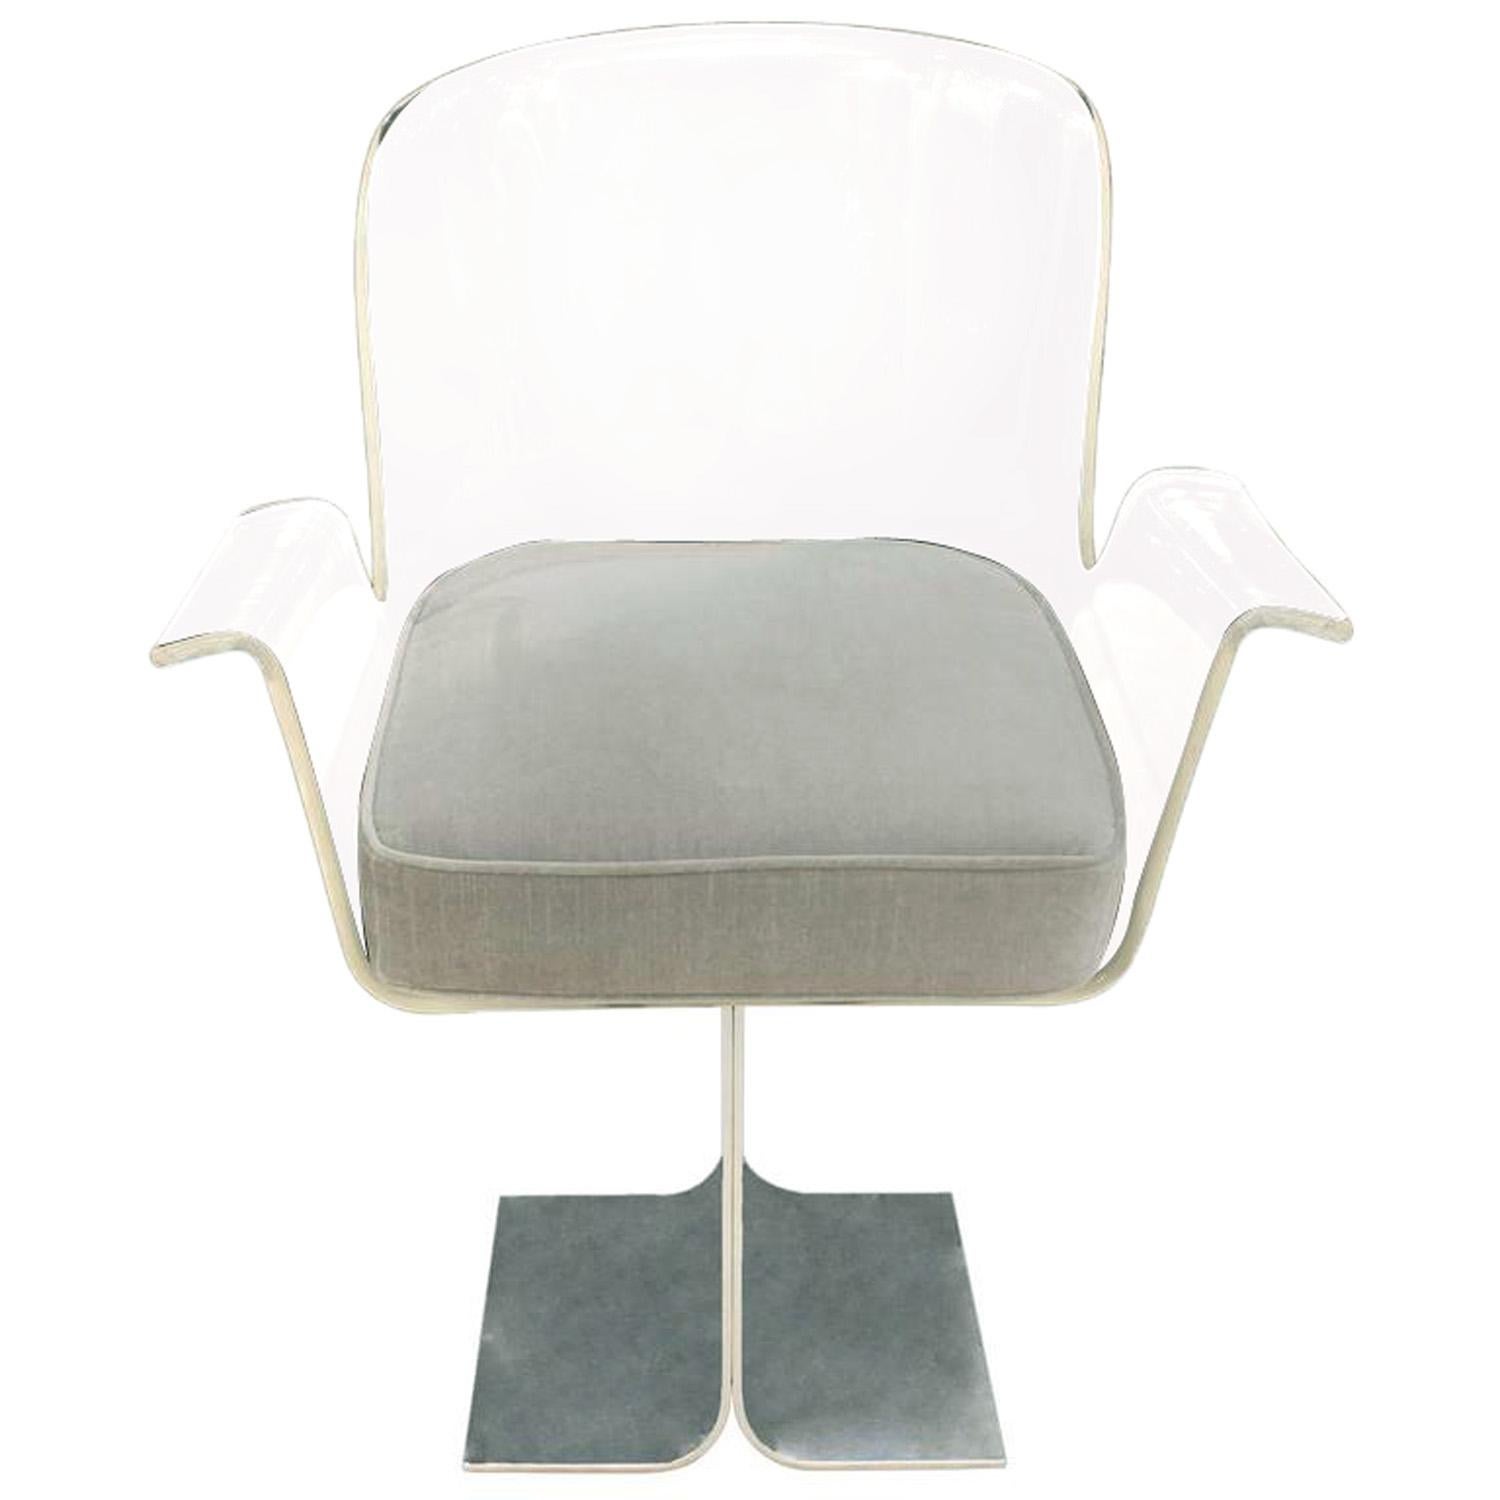 Sculptural desk chair No. 171 with swiveling lucite seat and cushion on polished aluminum base by I. M. Rosen for The Pace Collection, American 1970's This chair is very chic. New cushion by Lobel Modern.
 